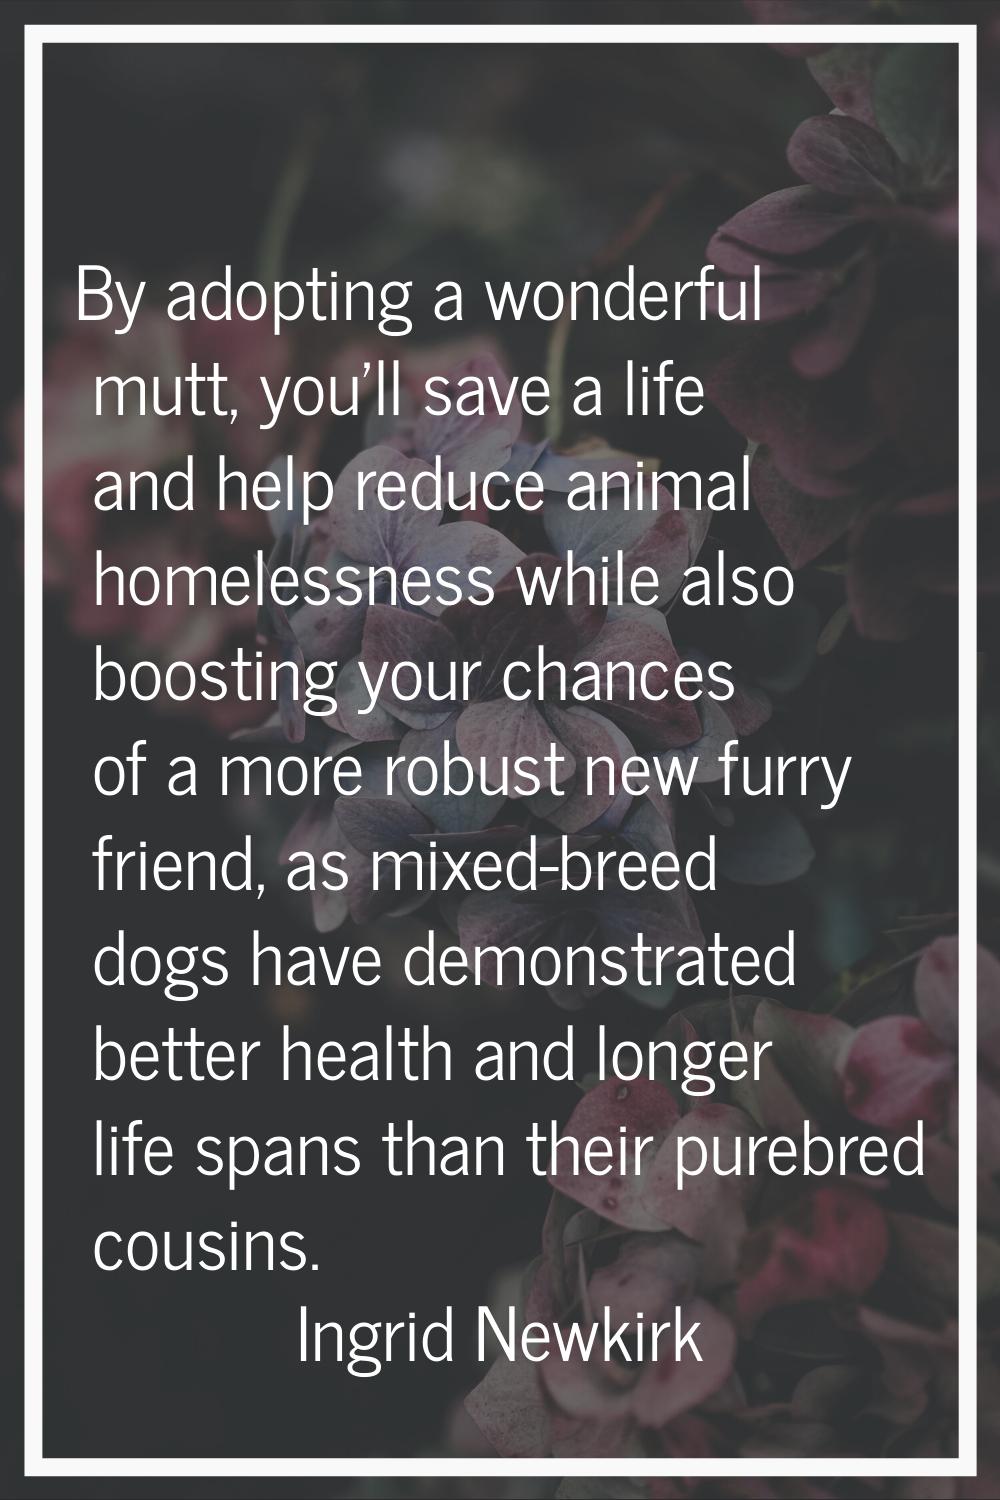 By adopting a wonderful mutt, you'll save a life and help reduce animal homelessness while also boo